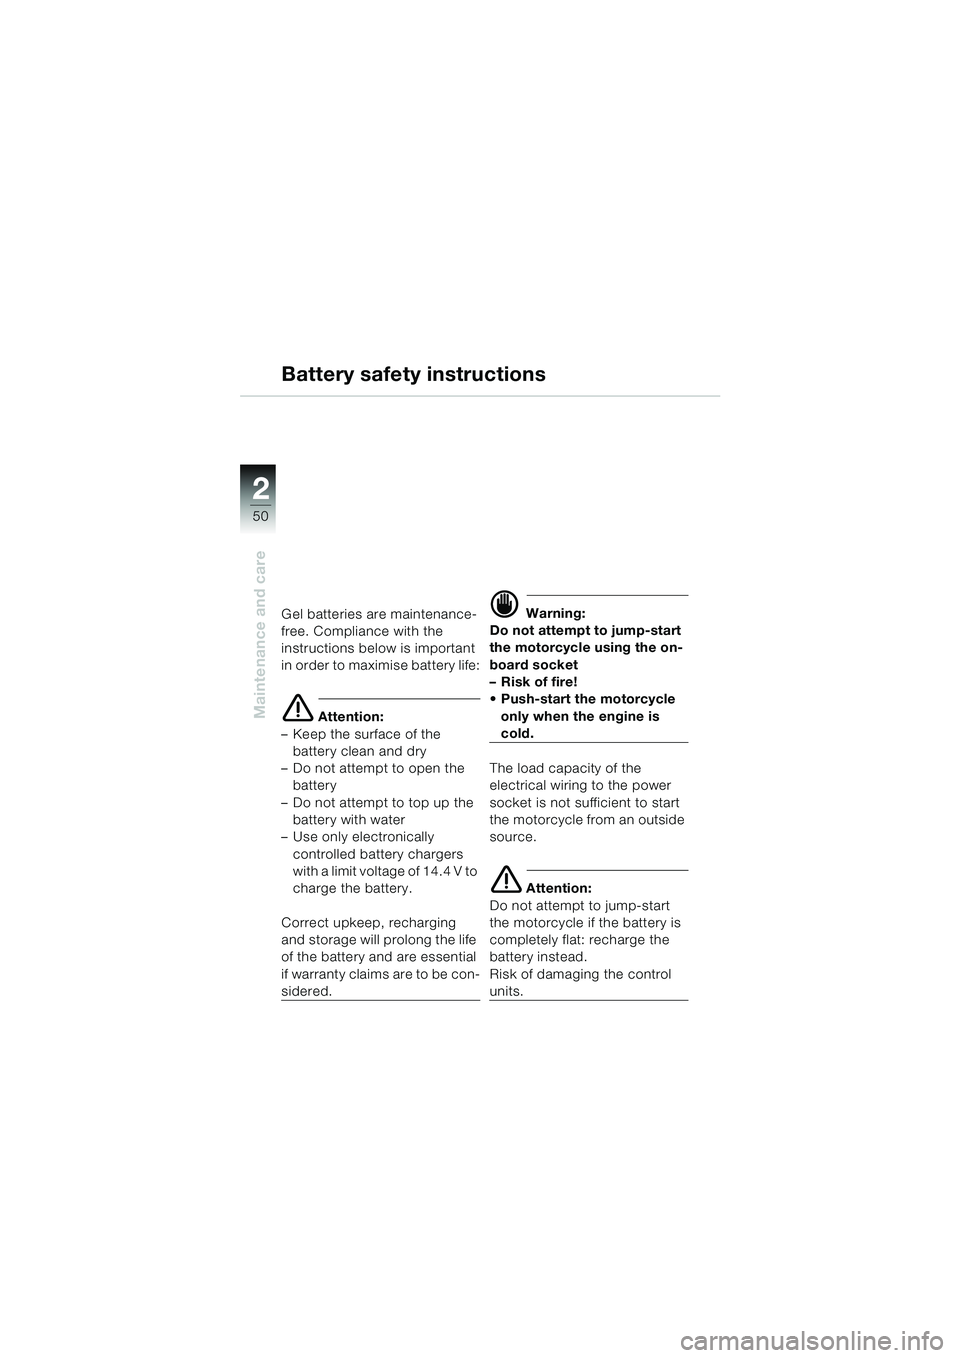 BMW MOTORRAD K 1200 RS 2004  Riders Manual (in English) 50
Maintenance and care
2
Battery safety instructions
Gel batteries are maintenance-
free. Compliance with the 
instructions below is important 
in order to maximise battery life:
e Attention:
– Kee